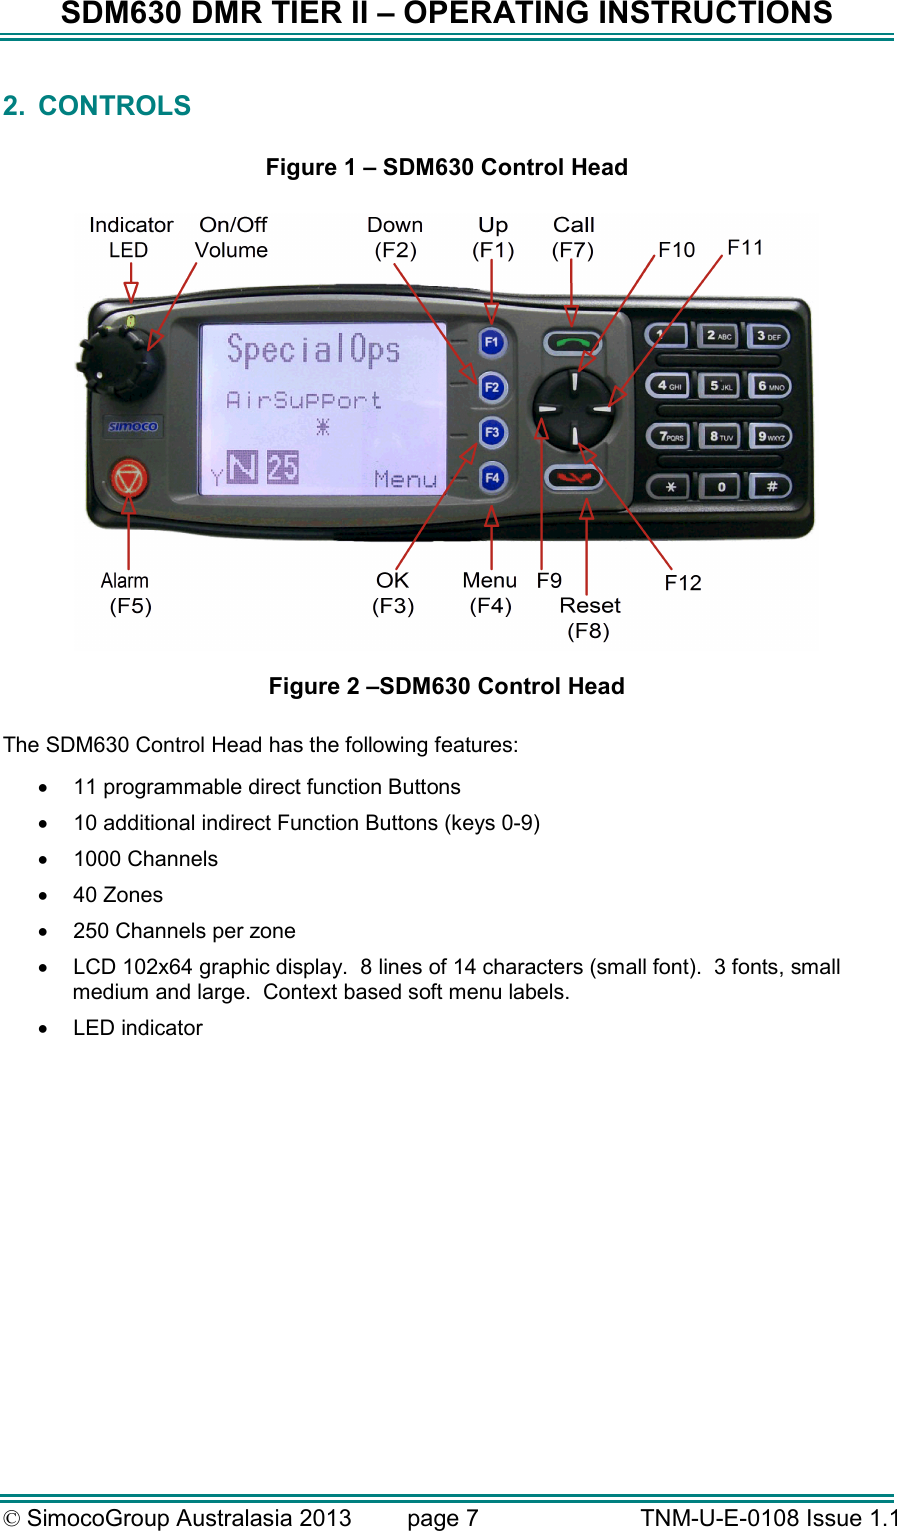 SDM630 DMR TIER II – OPERATING INSTRUCTIONS © SimocoGroup Australasia 2013   page 7   TNM-U-E-0108 Issue 1.1 2.  CONTROLS  Figure 1 – SDM630 Control Head   Figure 2 –SDM630 Control Head  The SDM630 Control Head has the following features: •  11 programmable direct function Buttons •  10 additional indirect Function Buttons (keys 0-9) •  1000 Channels •  40 Zones  •  250 Channels per zone •  LCD 102x64 graphic display.  8 lines of 14 characters (small font).  3 fonts, small medium and large.  Context based soft menu labels. •  LED indicator 